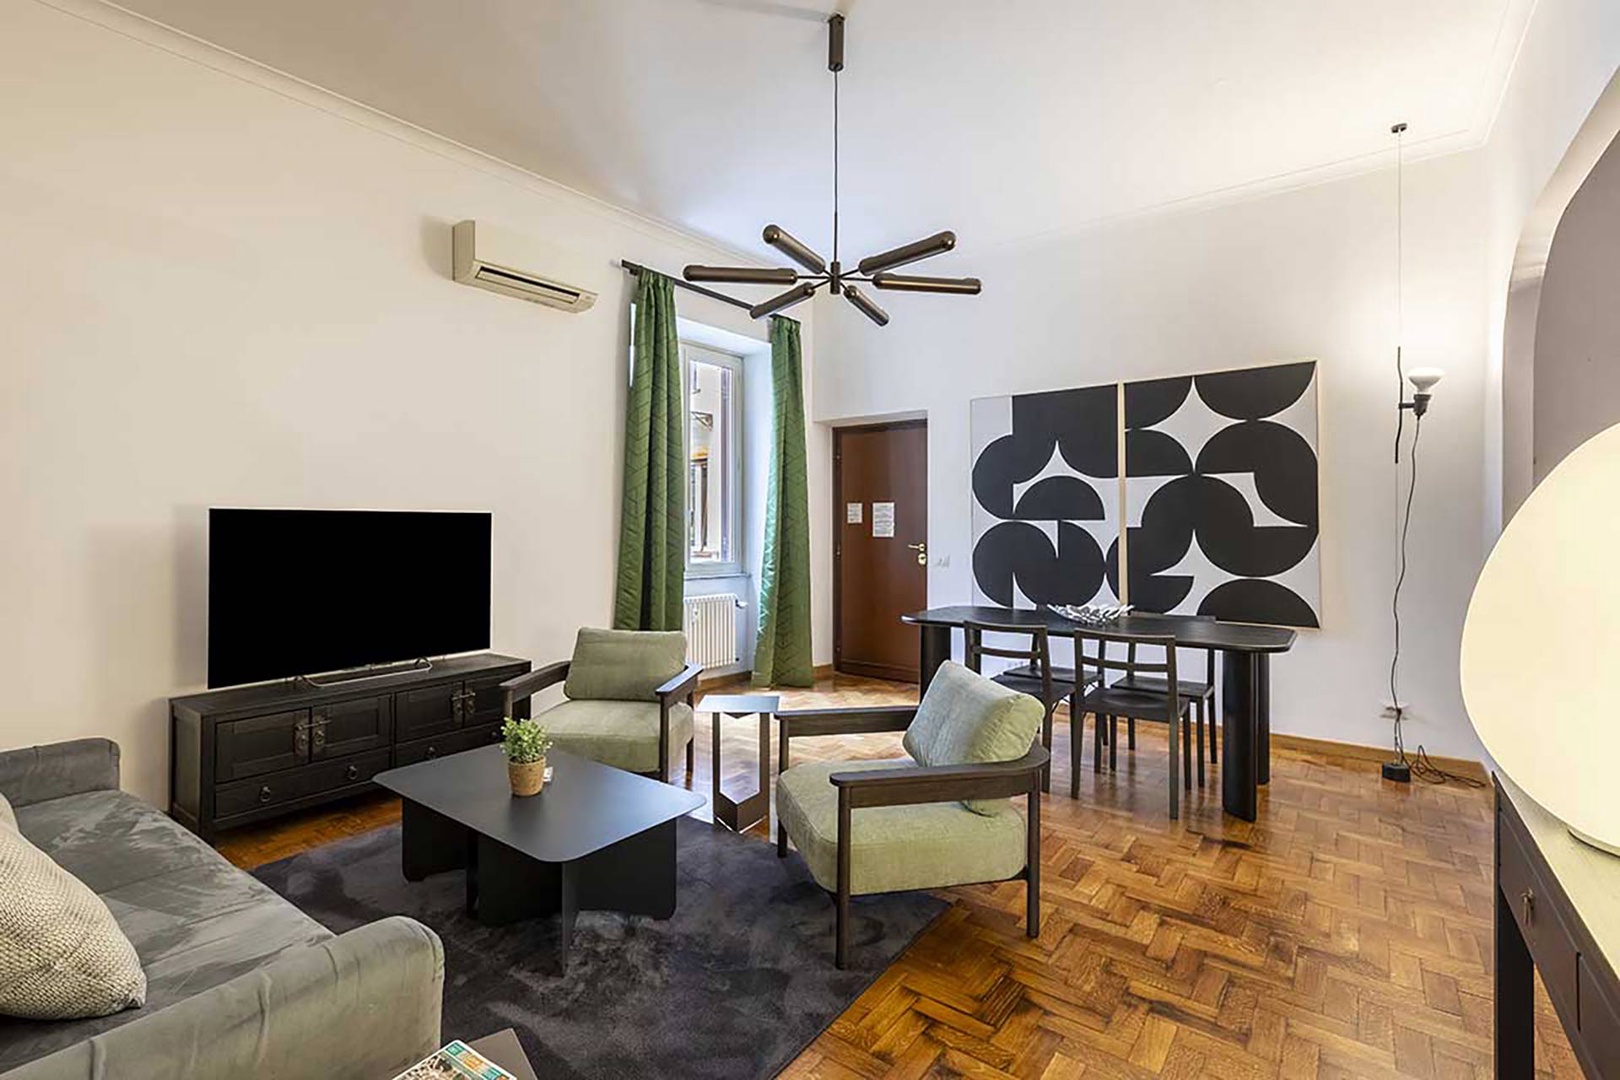 Welcome to the modern and bright Corelli Charm apartment.